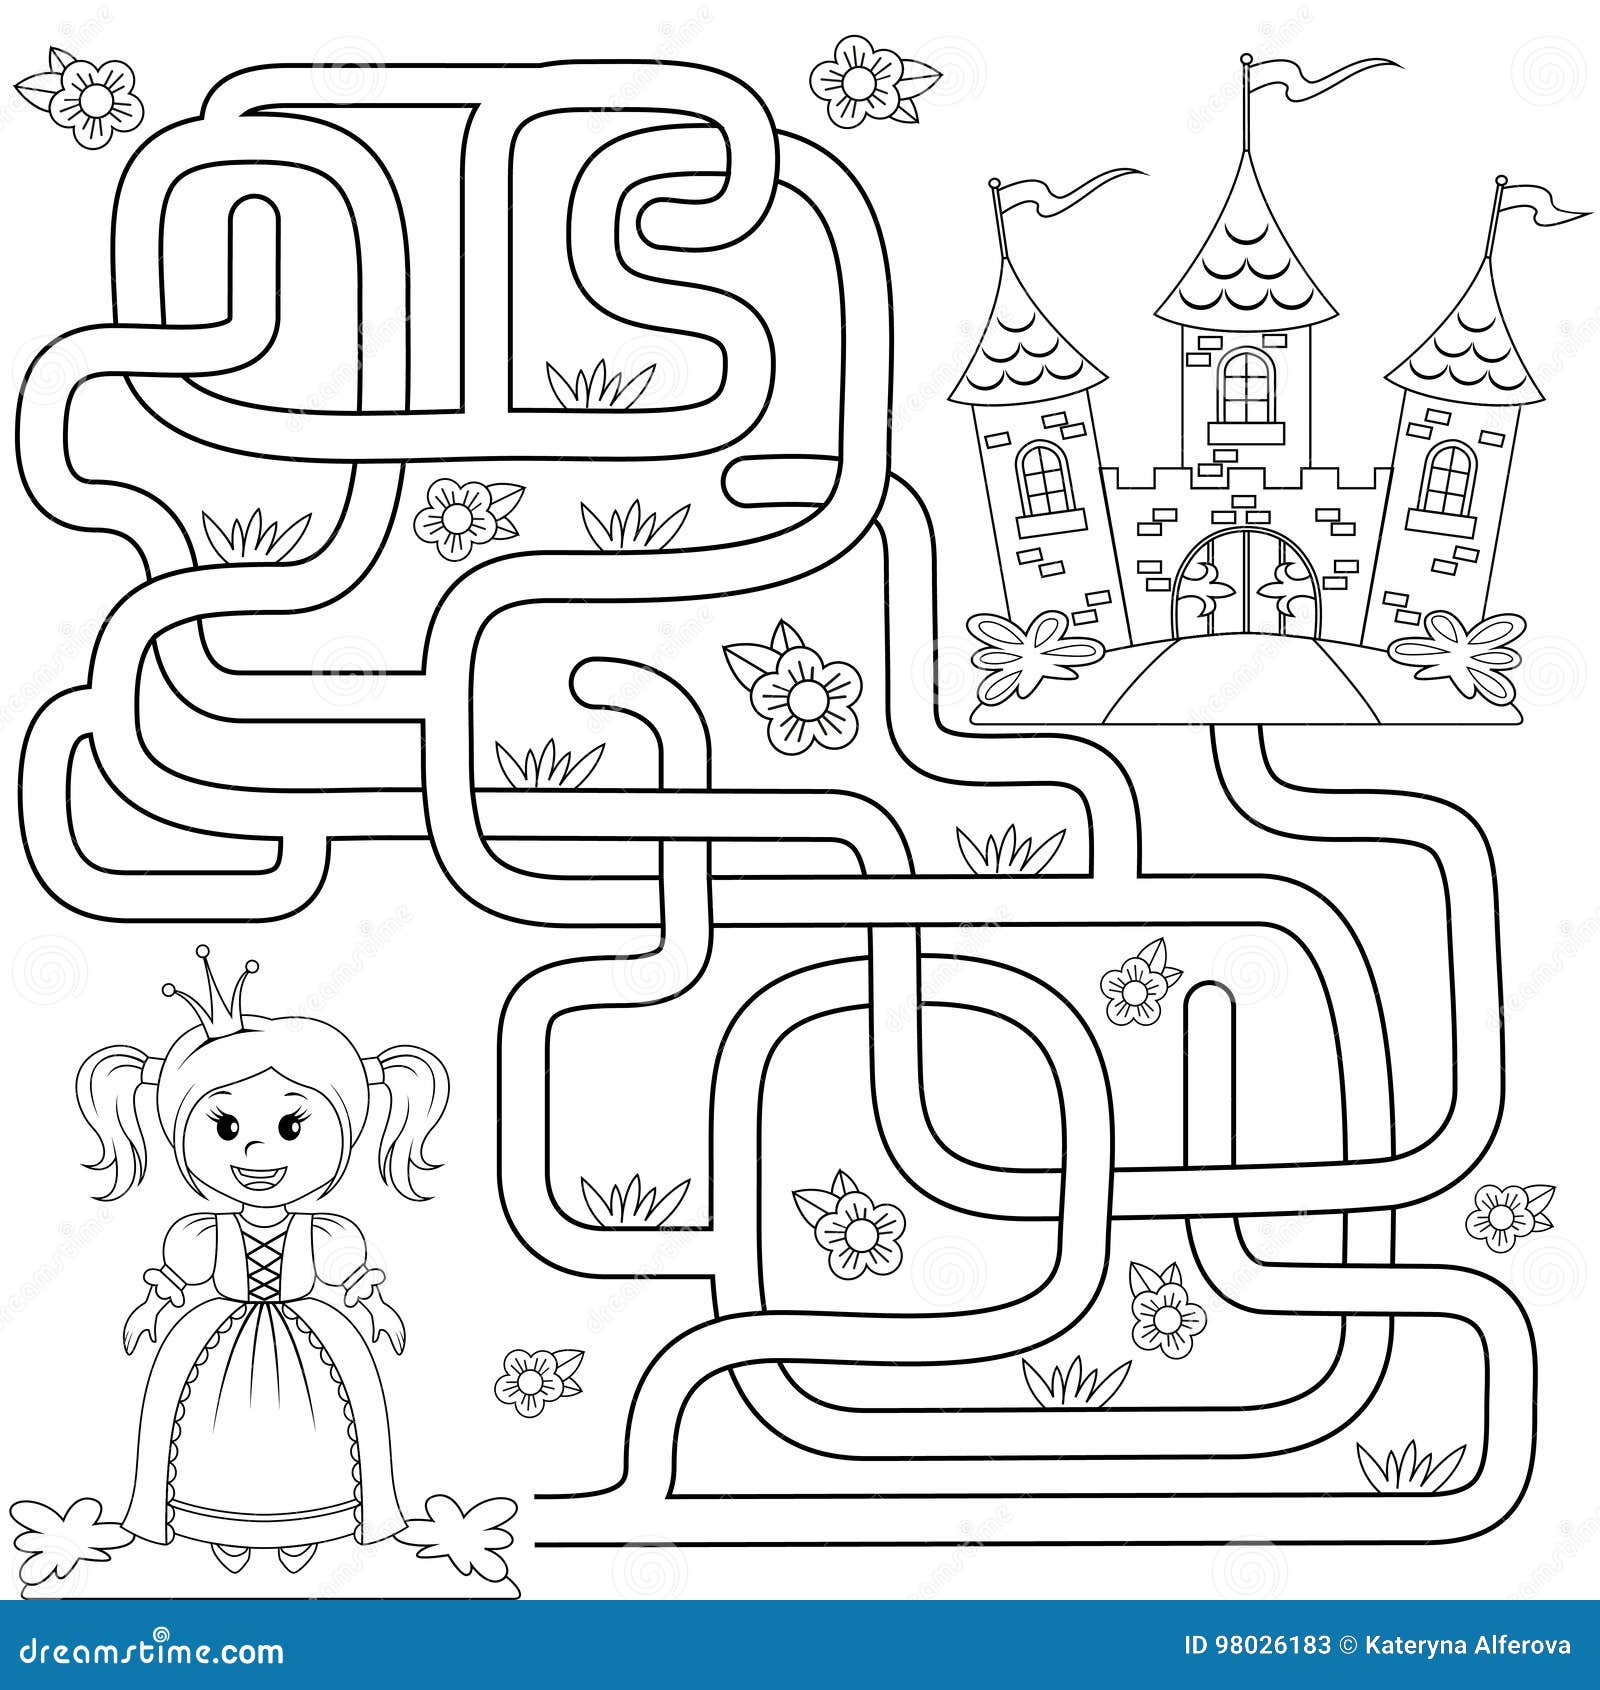 Help Little Cute Princess Find Path To Castle Labyrinth Maze Game